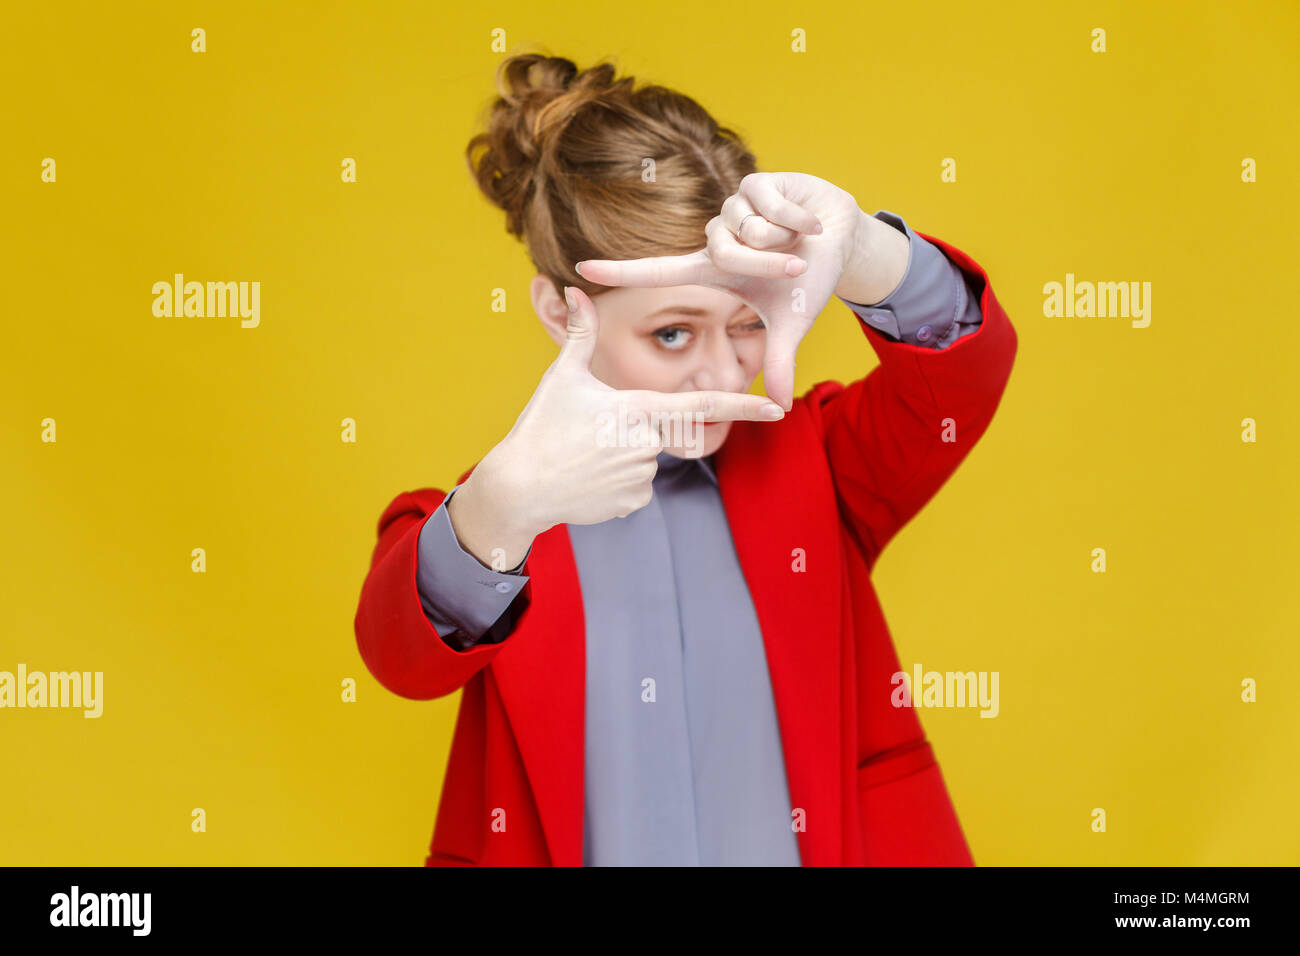 Red head business woman in red suit showing frame,crop sign. Studio shot, isolated on yellow background Stock Photo